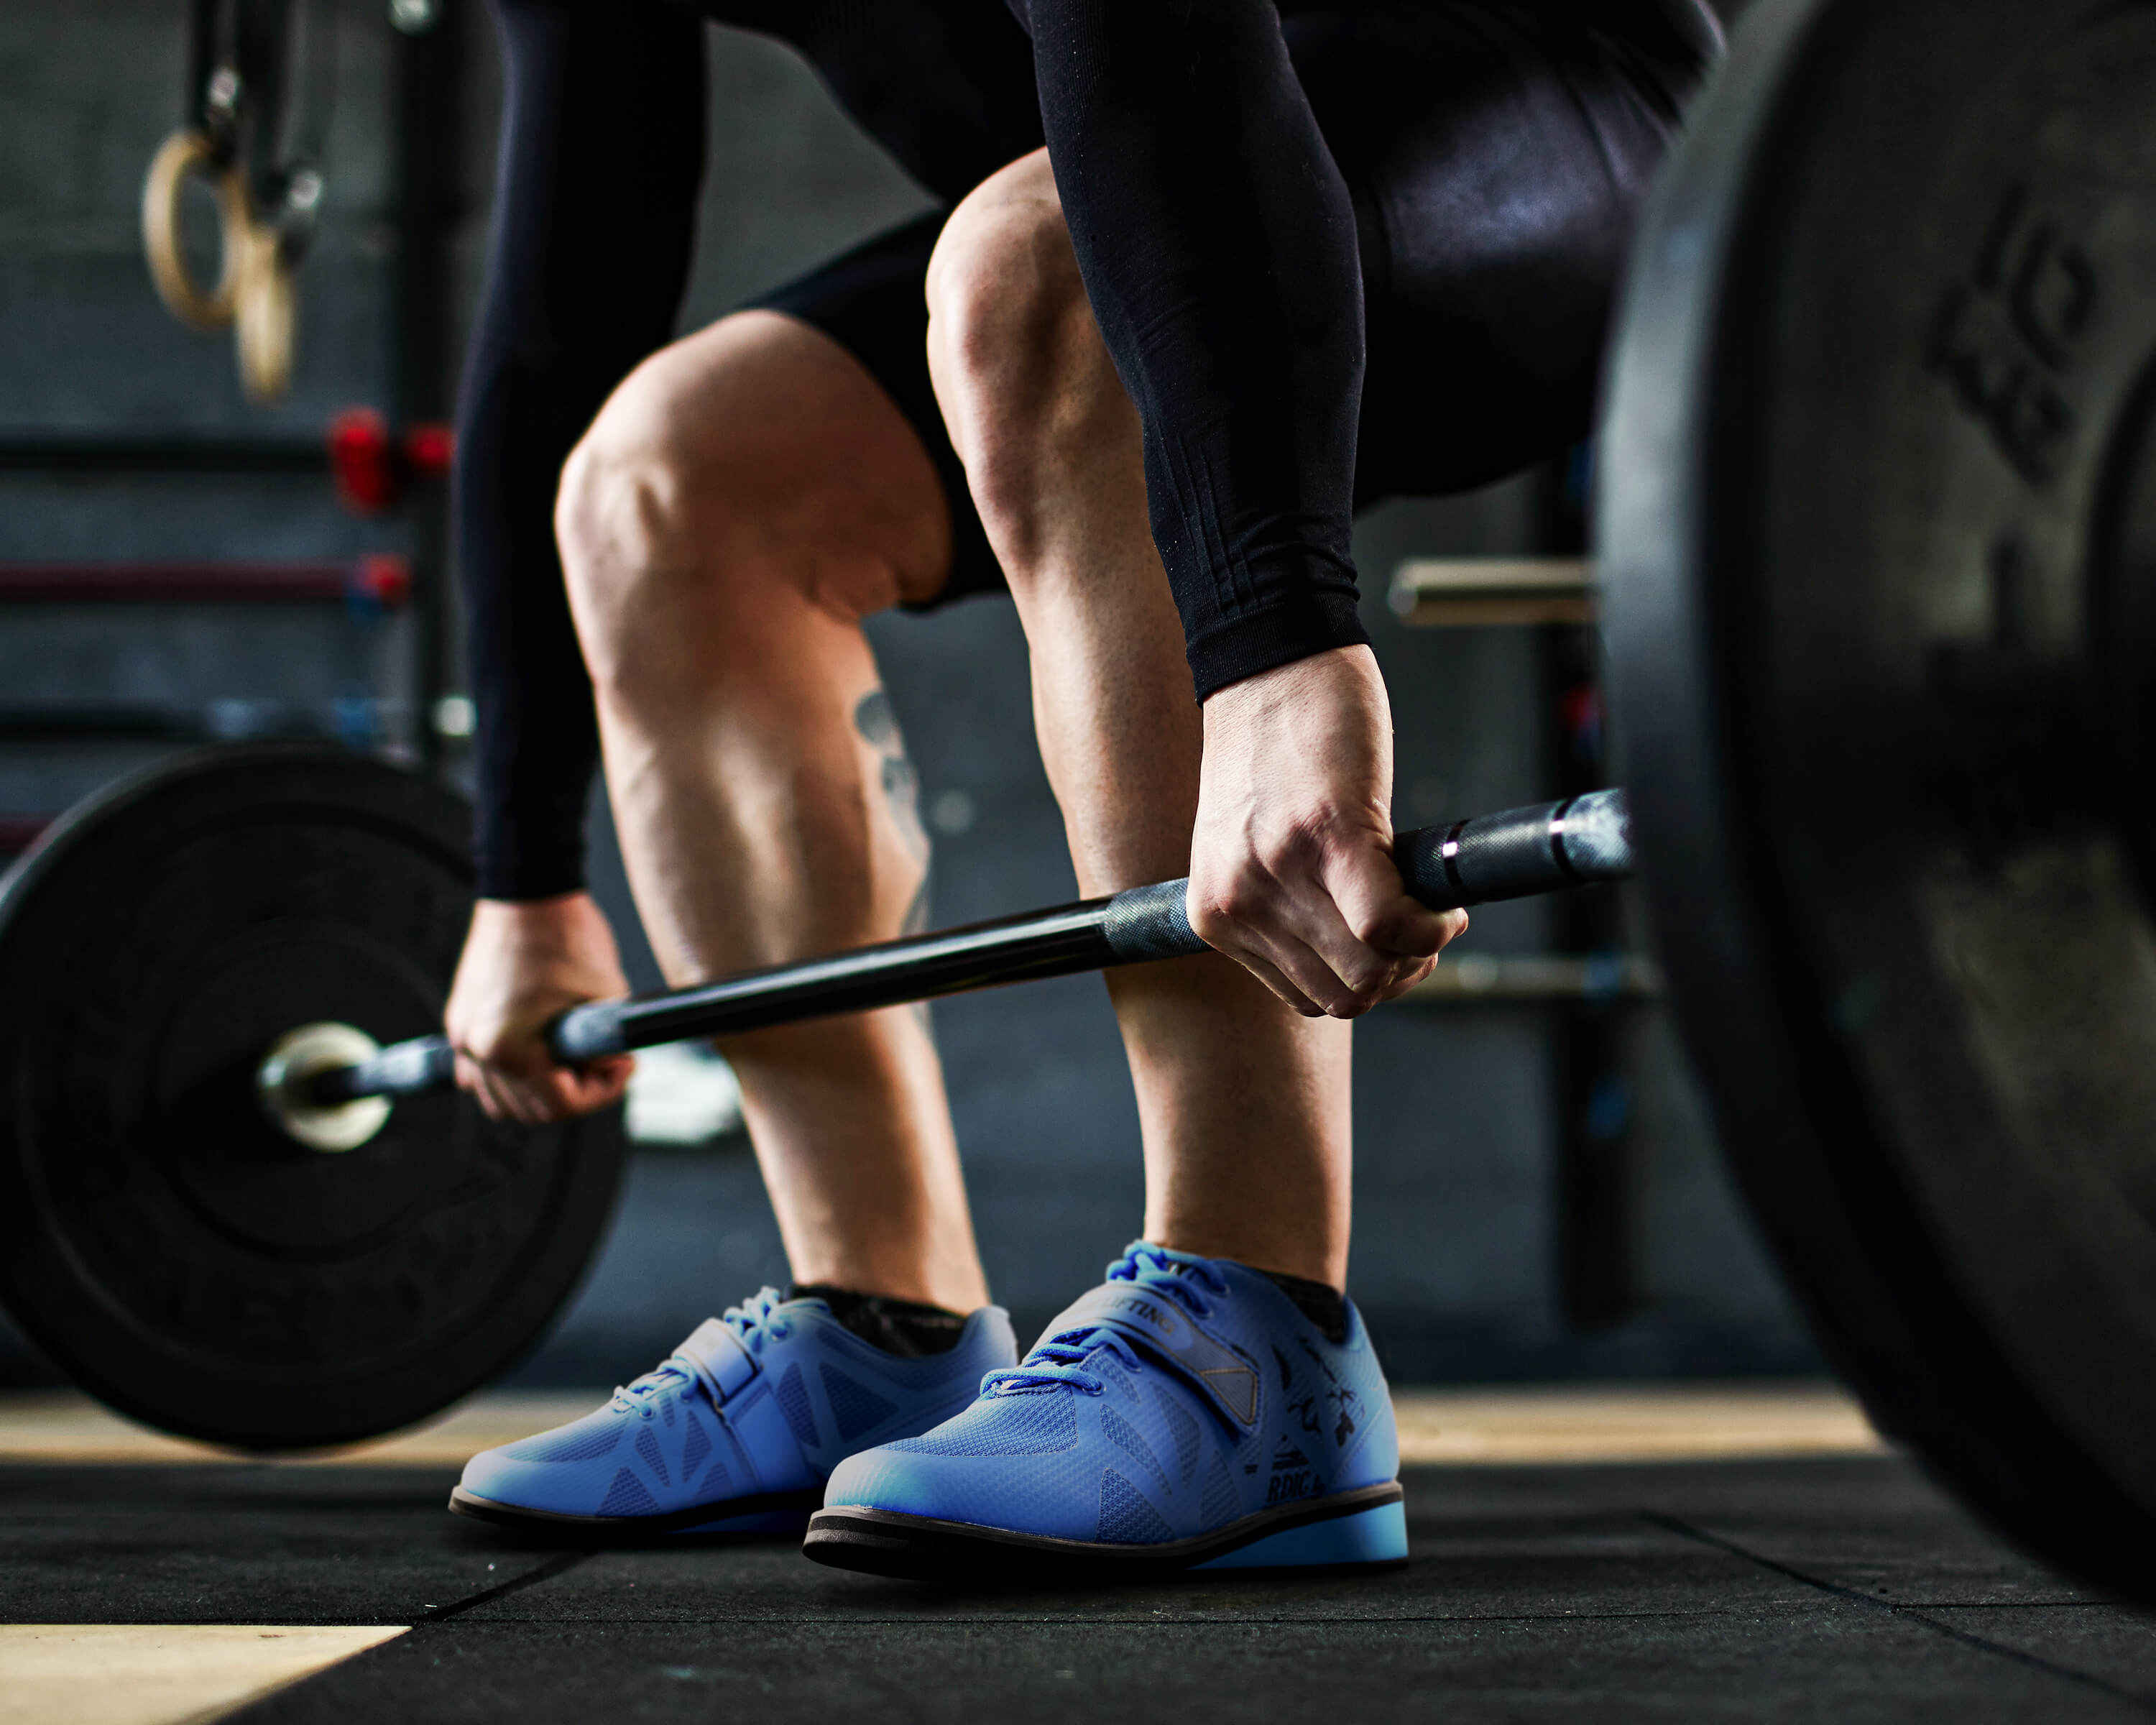 The Best Lifting Shoes For Your Daily Workout Routine – Nordic Lifting